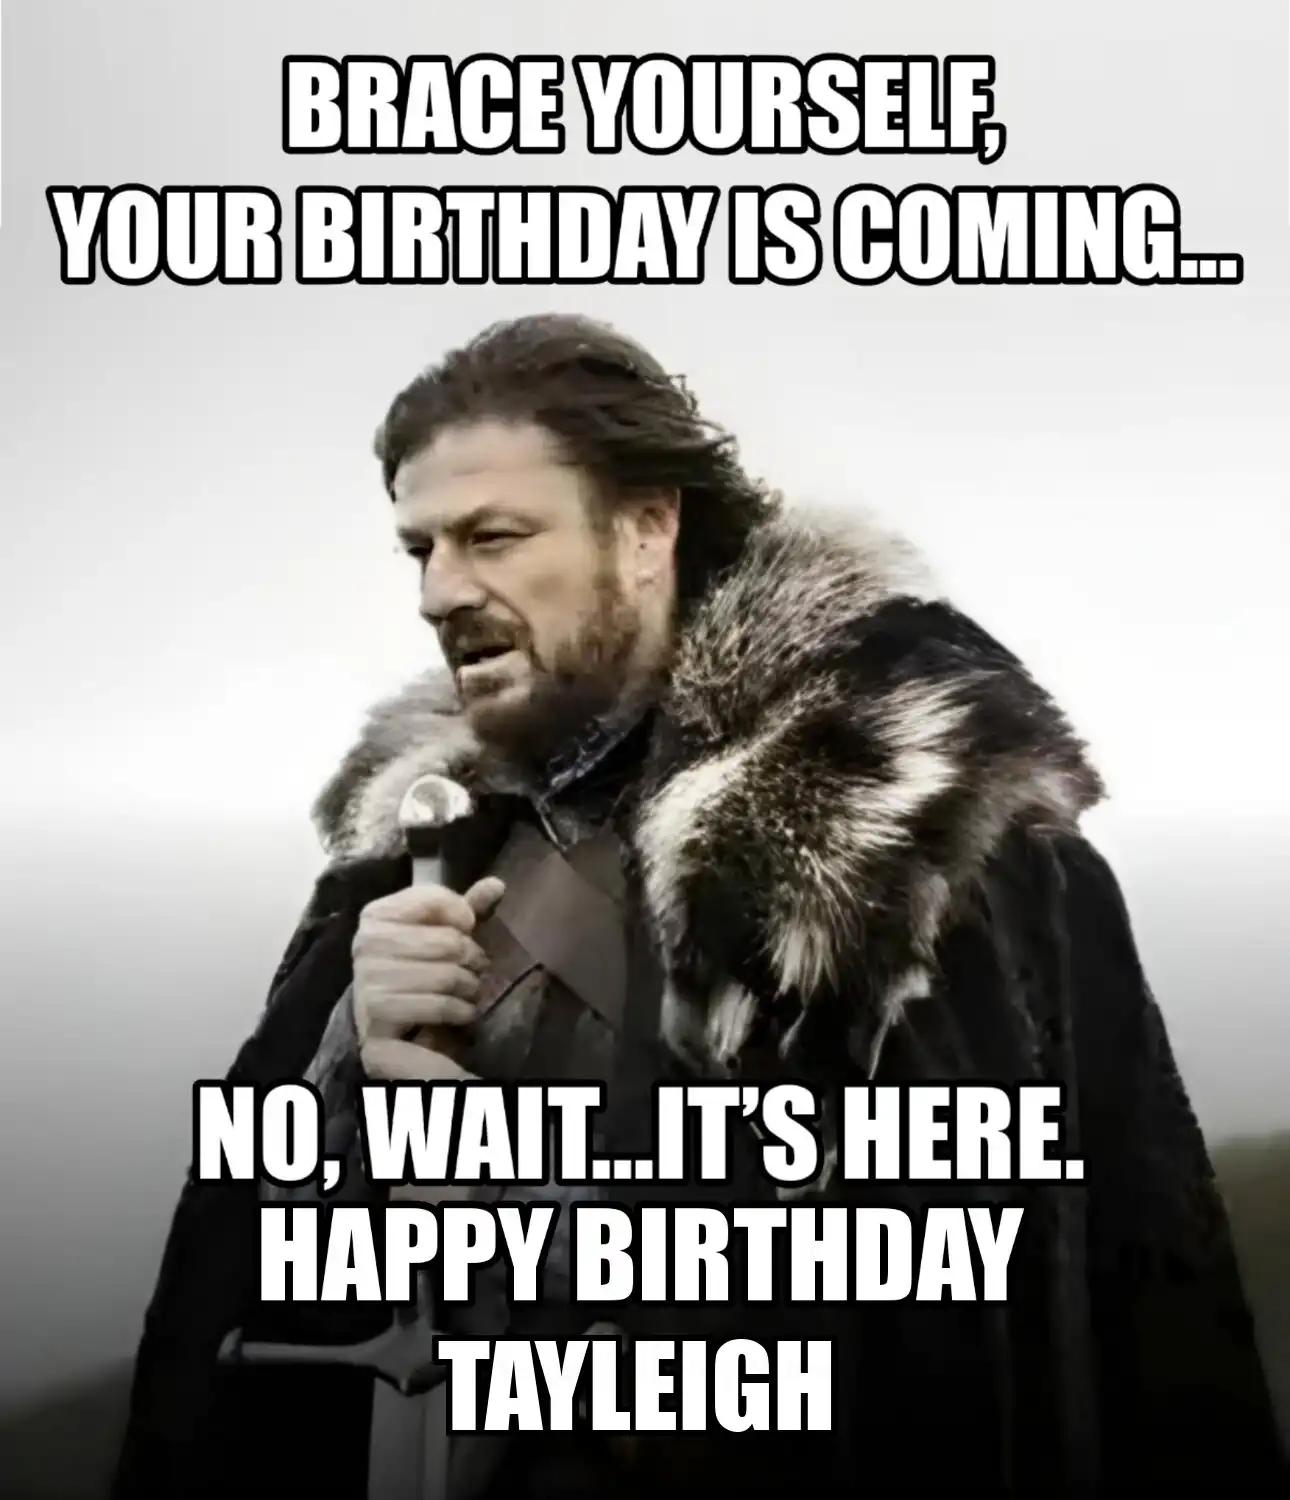 Happy Birthday Tayleigh Brace Yourself Your Birthday Is Coming Meme